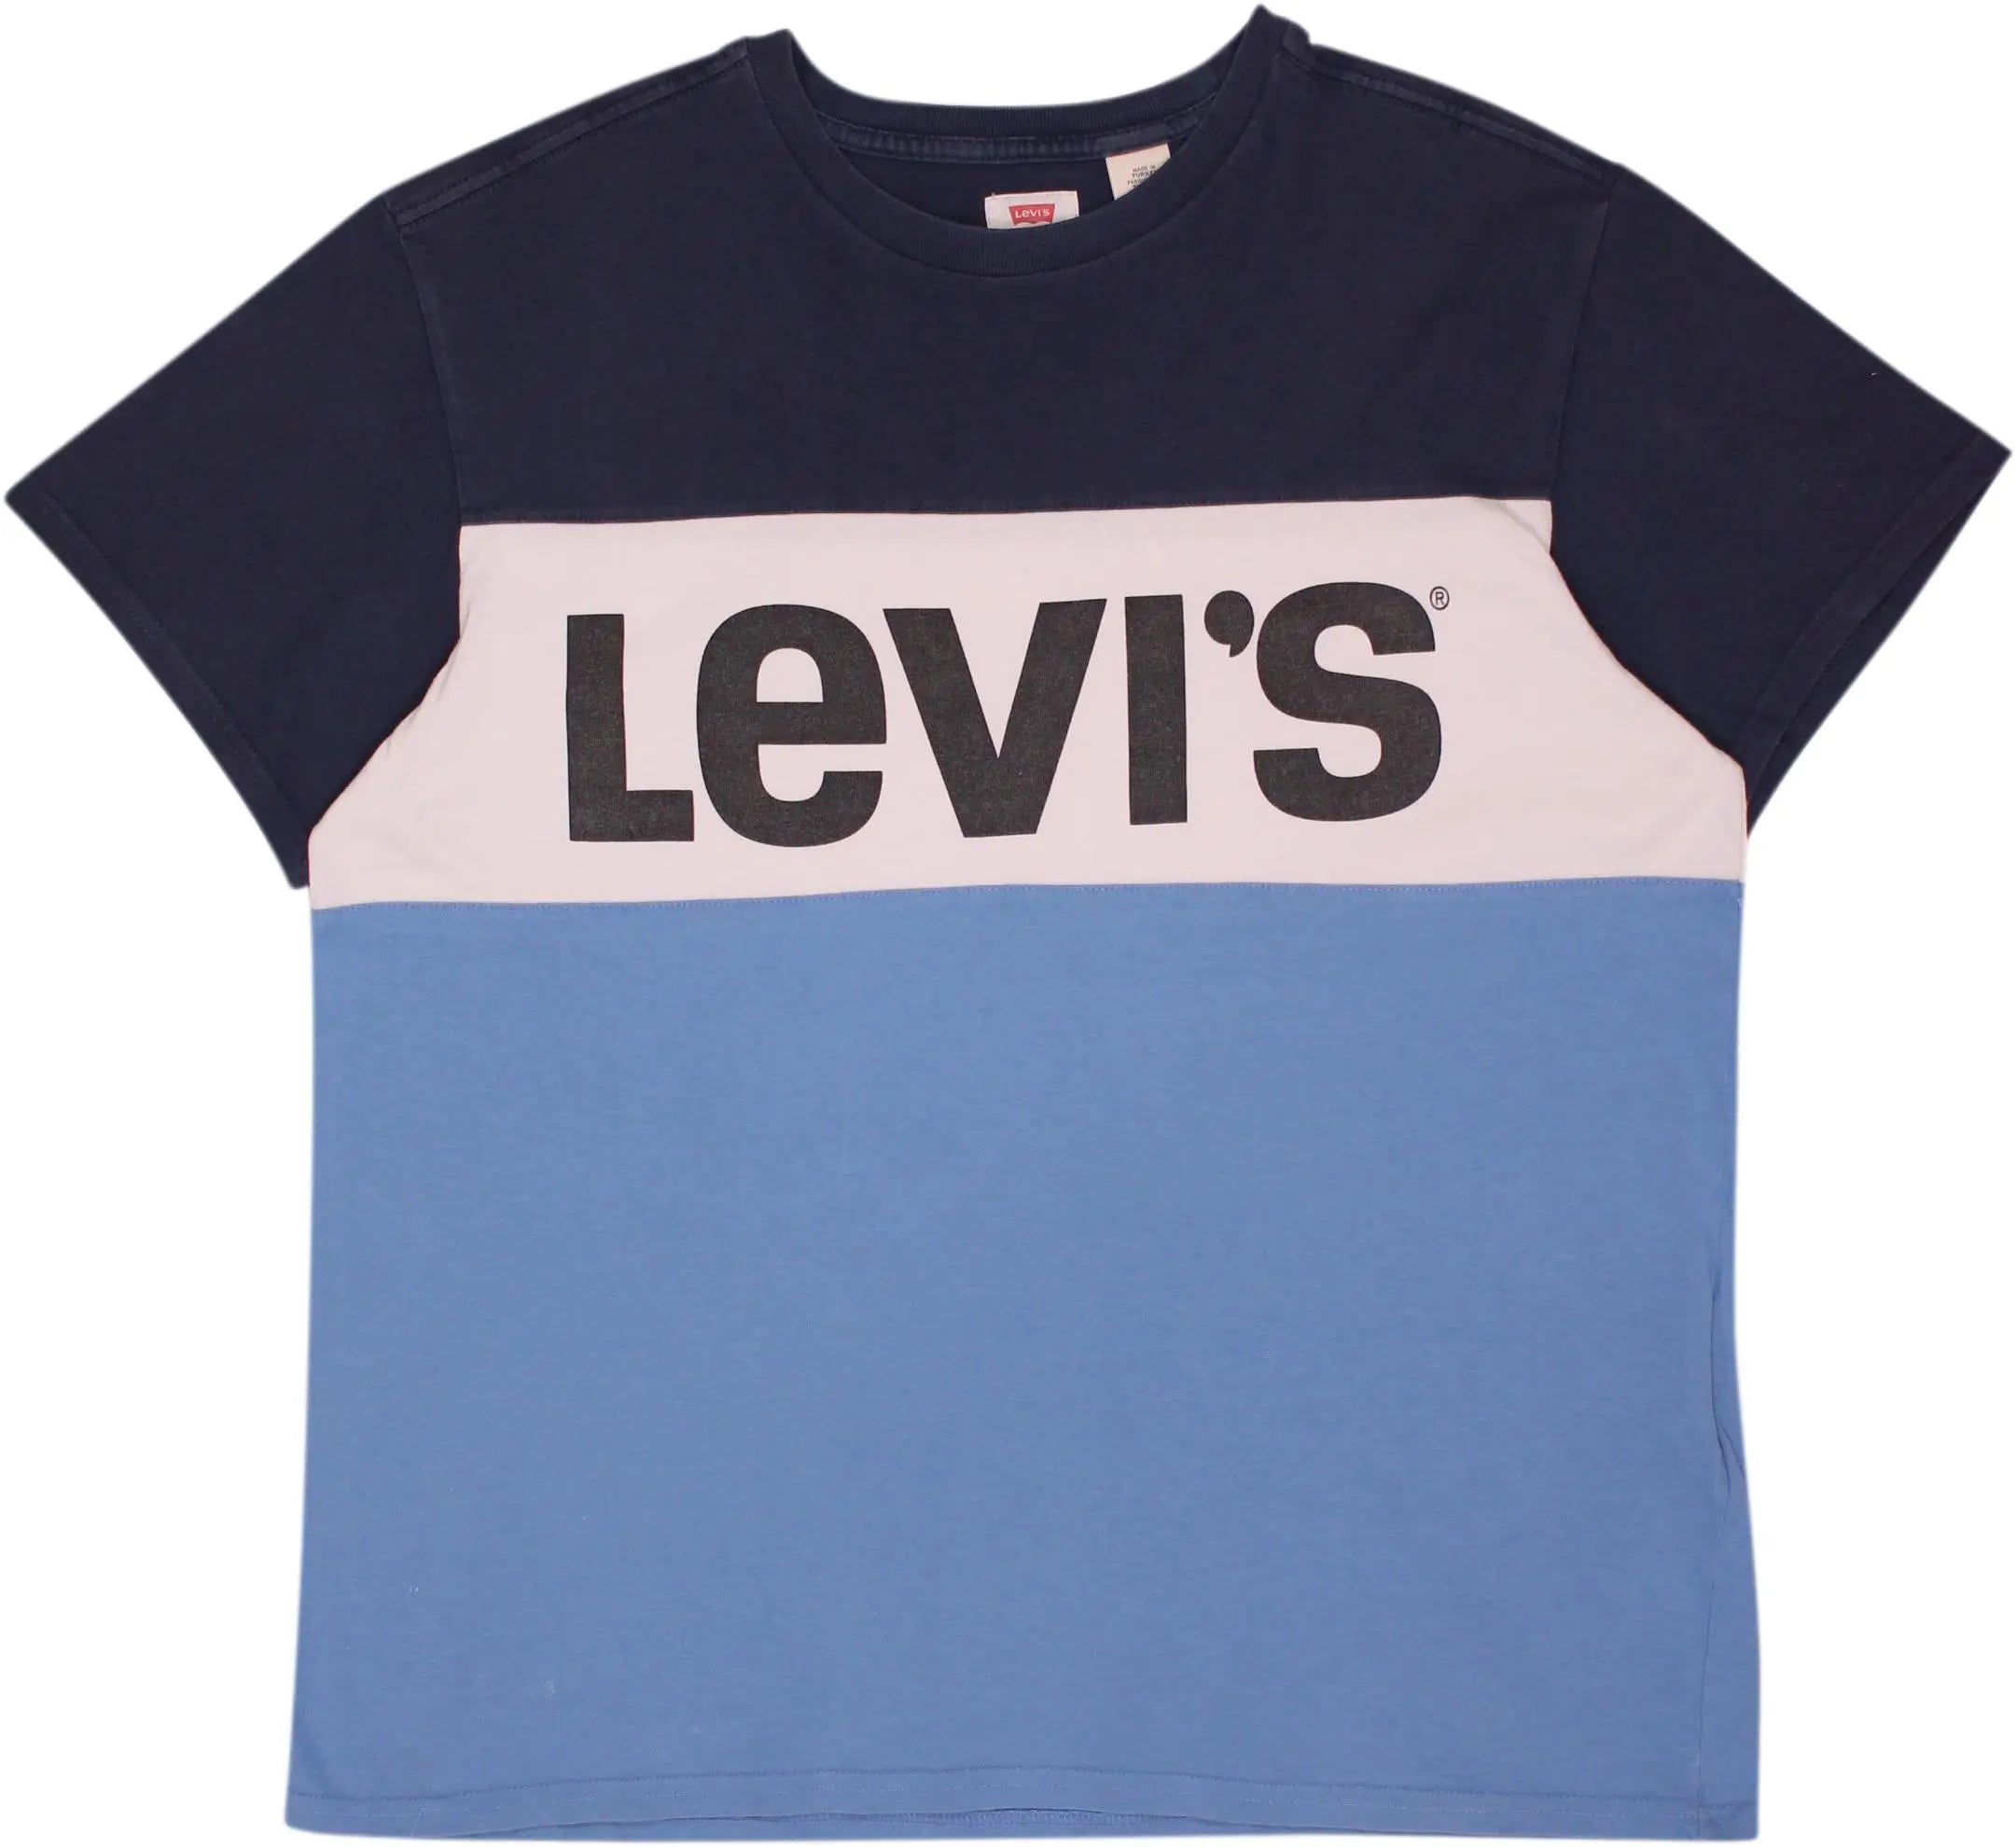 Levi's - Blue T-shirt by Levi's- ThriftTale.com - Vintage and second handclothing